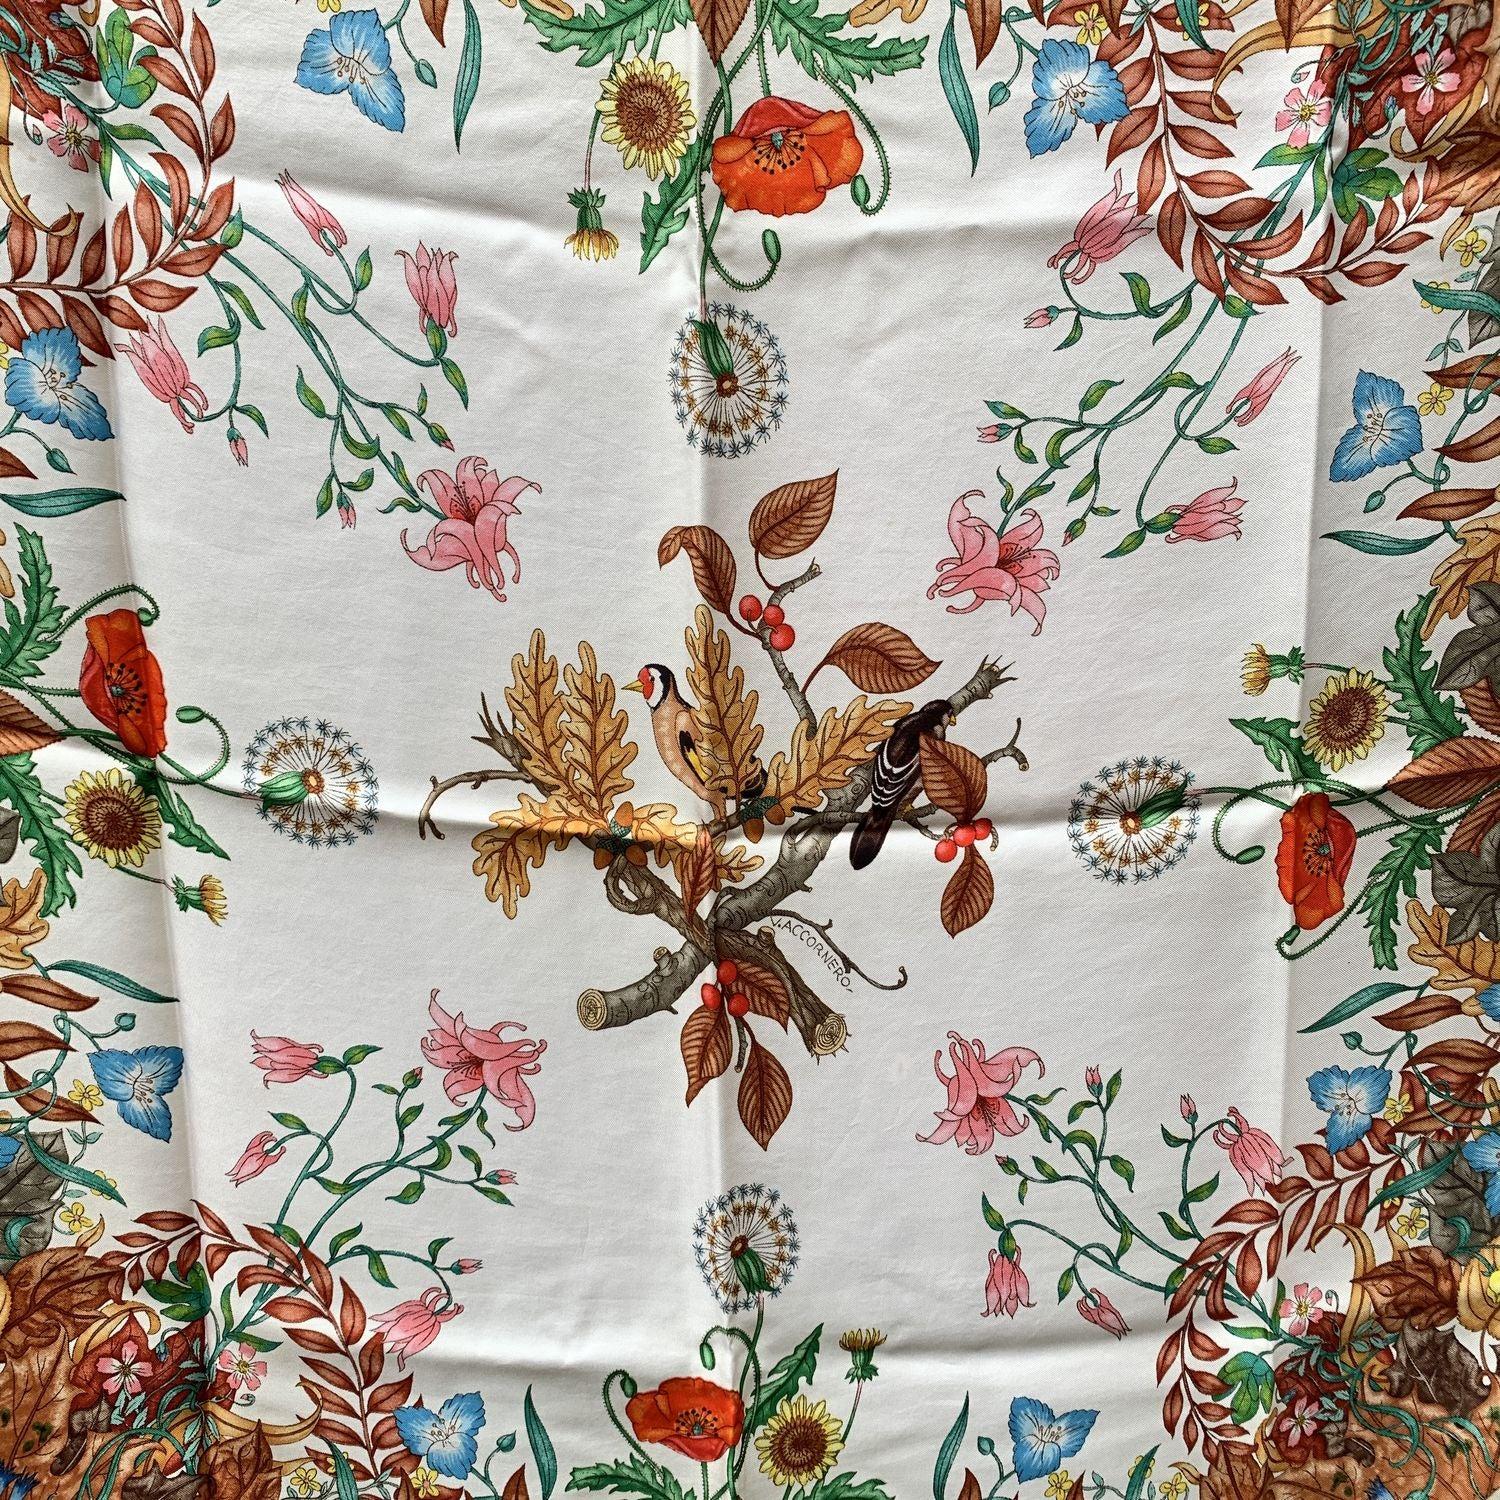 Gucci Vintage Fall themed Silk Scarf, designed by Vittorio Accornero for GUCCI in between the 60s and firt years of the 80s. Multicolor flowers with birds in the center design. Green borders. 100% Silk. Measurements: 35 x 35 inches - 90 x 90 cm.